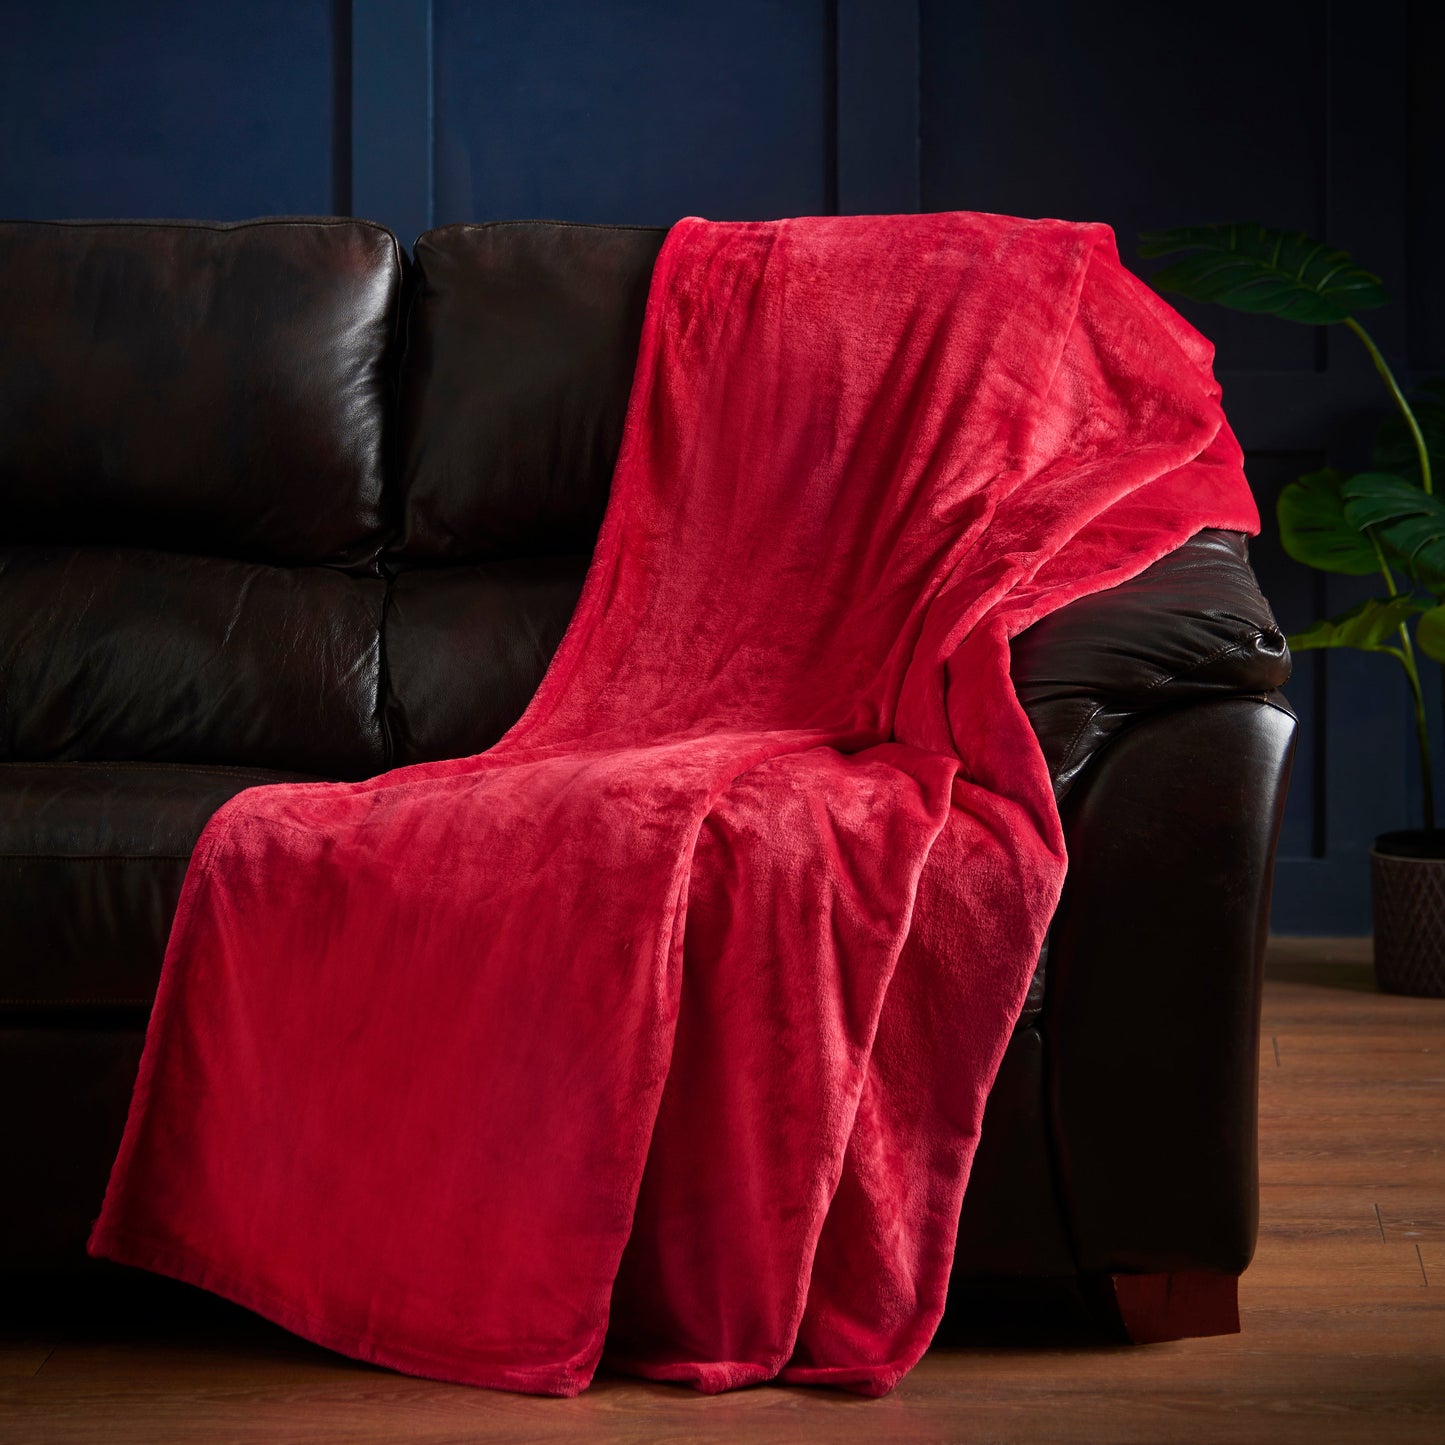 Super Soft Flannel Throw - Red